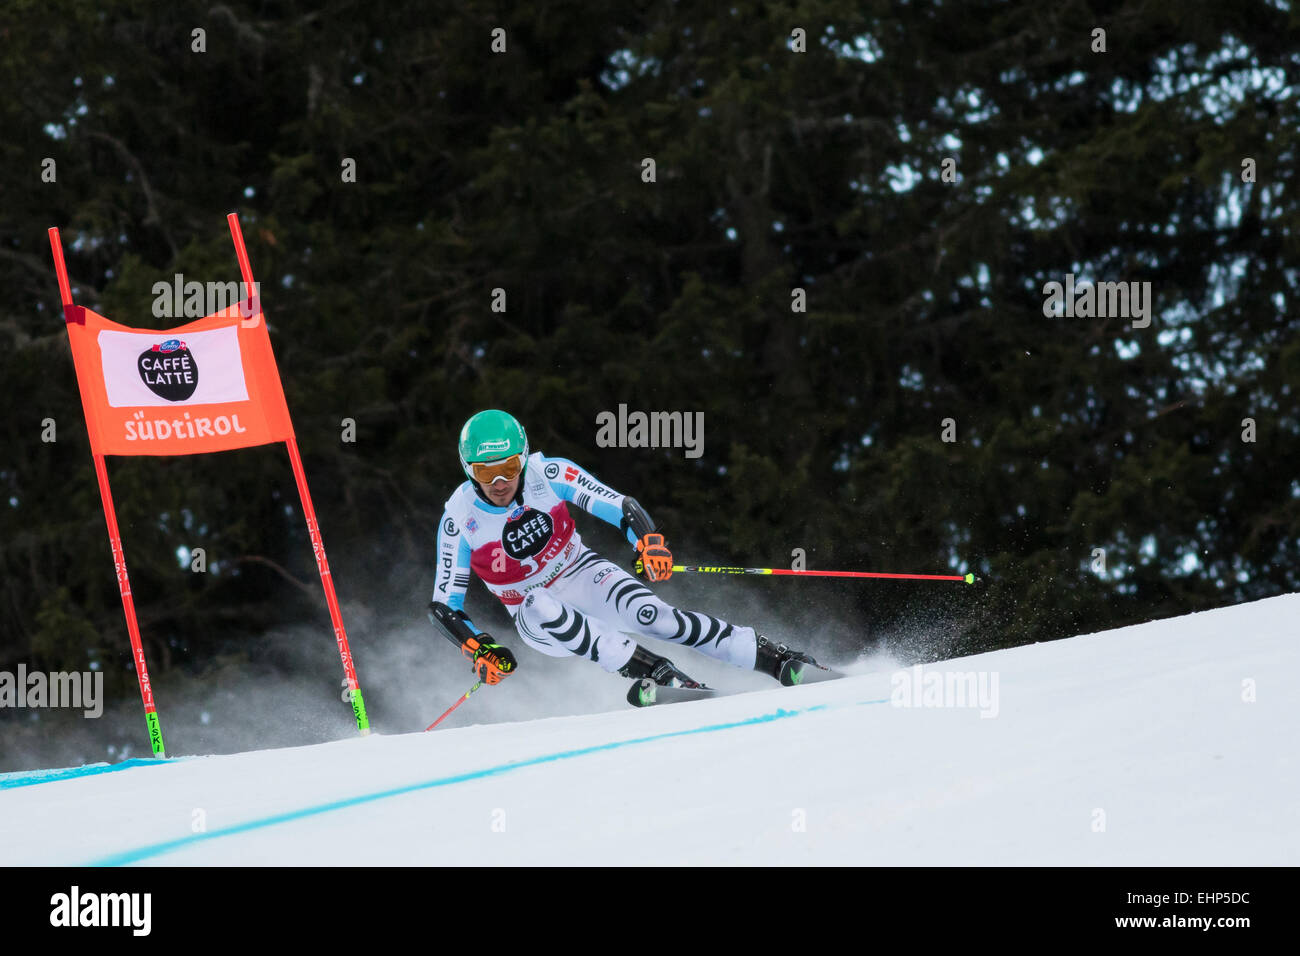 Val Badia, Italy 21 December 2014. NEUREUTHER Felix (Ger) competing in the Audi Fis Alpine Skiing World Cup Men’s Giant Slalom Stock Photo